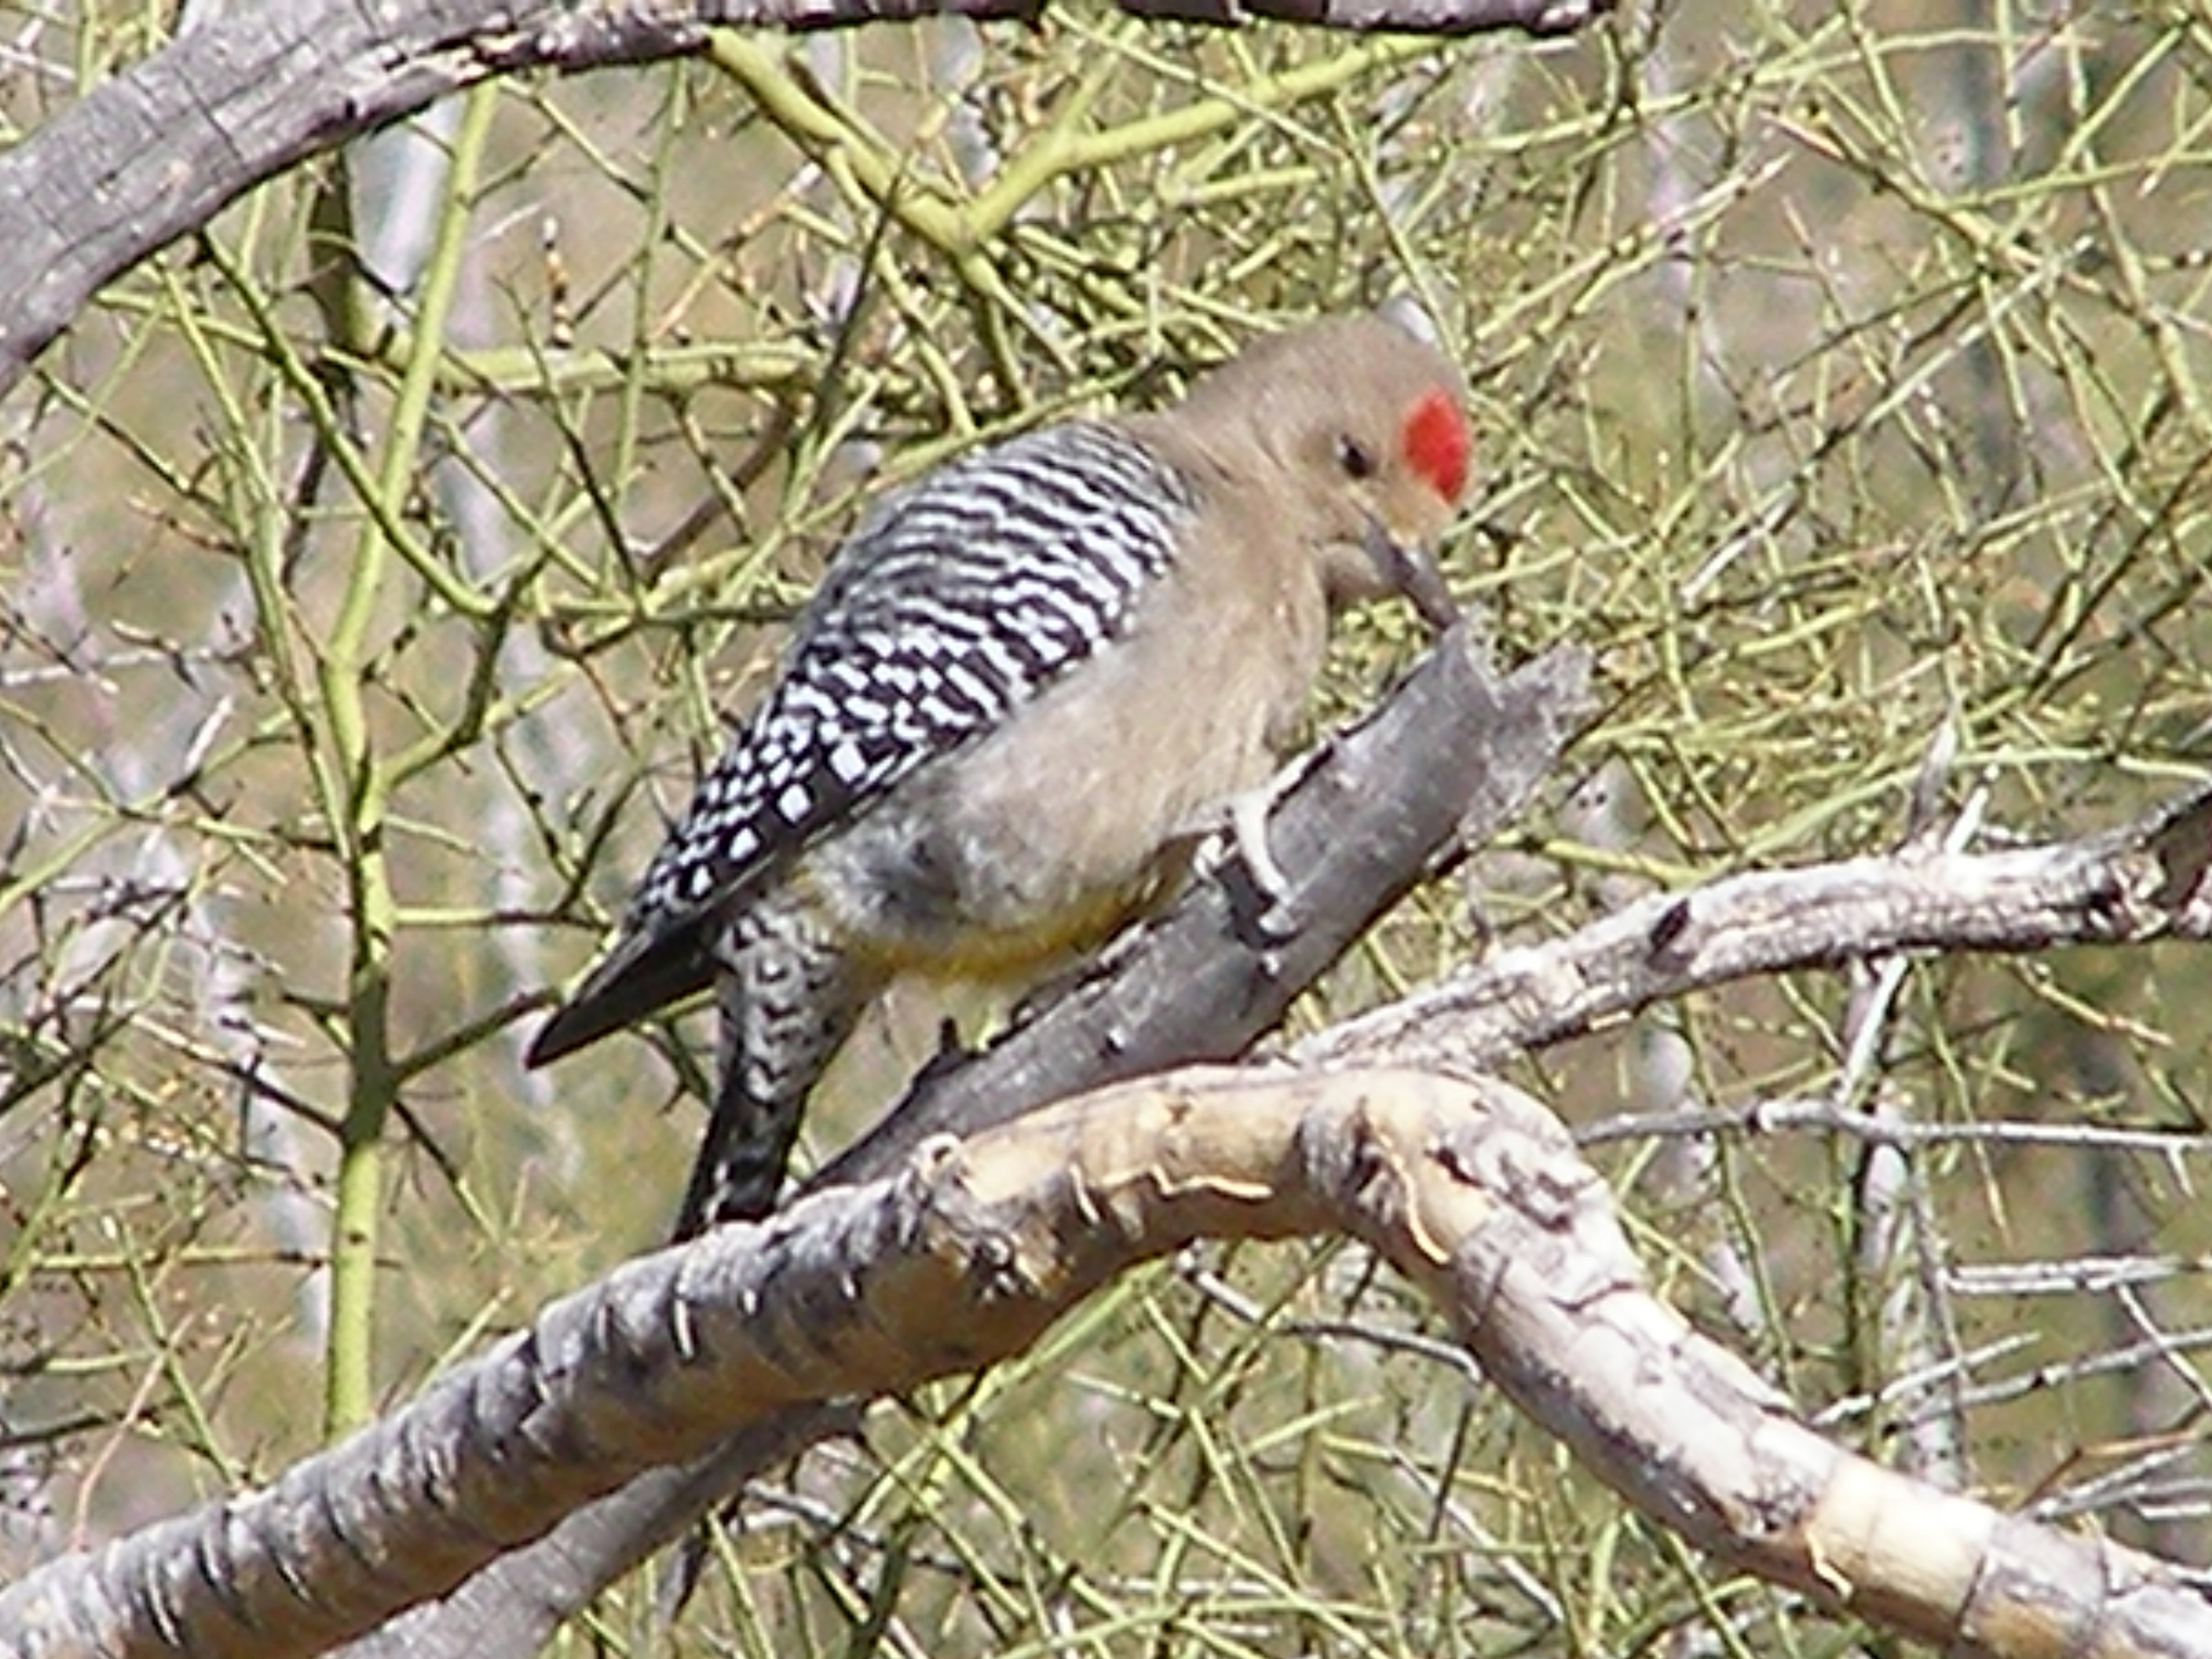 Click picture to see more Gila Woodpeckers.